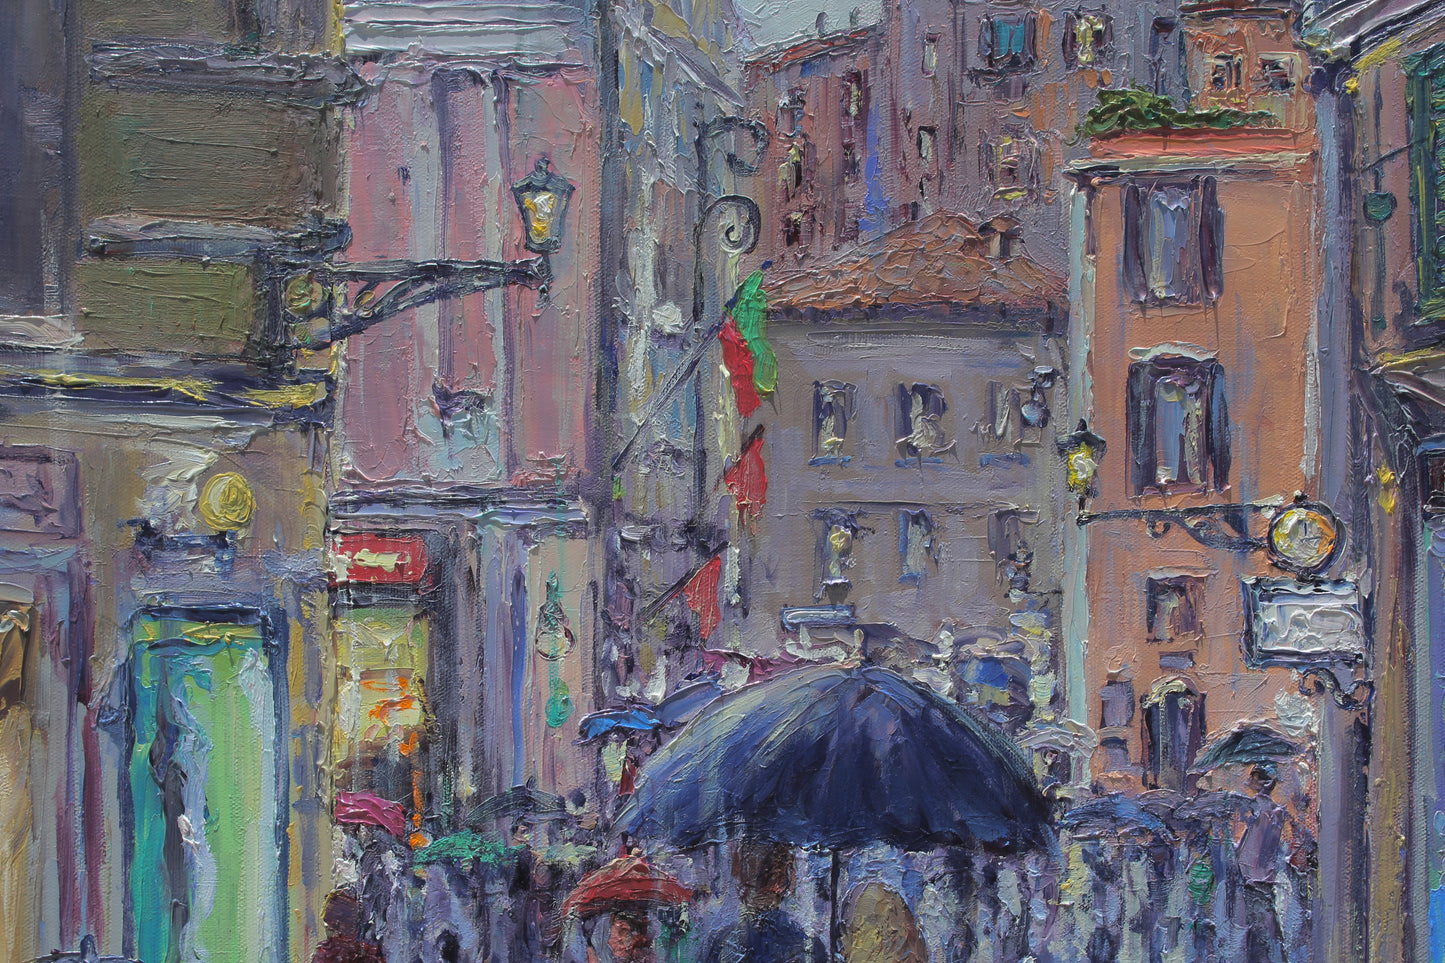 A Rainy Evening Stroll In Rome, Original 30" x 40" European Cityscape Oil Painting On Canvas